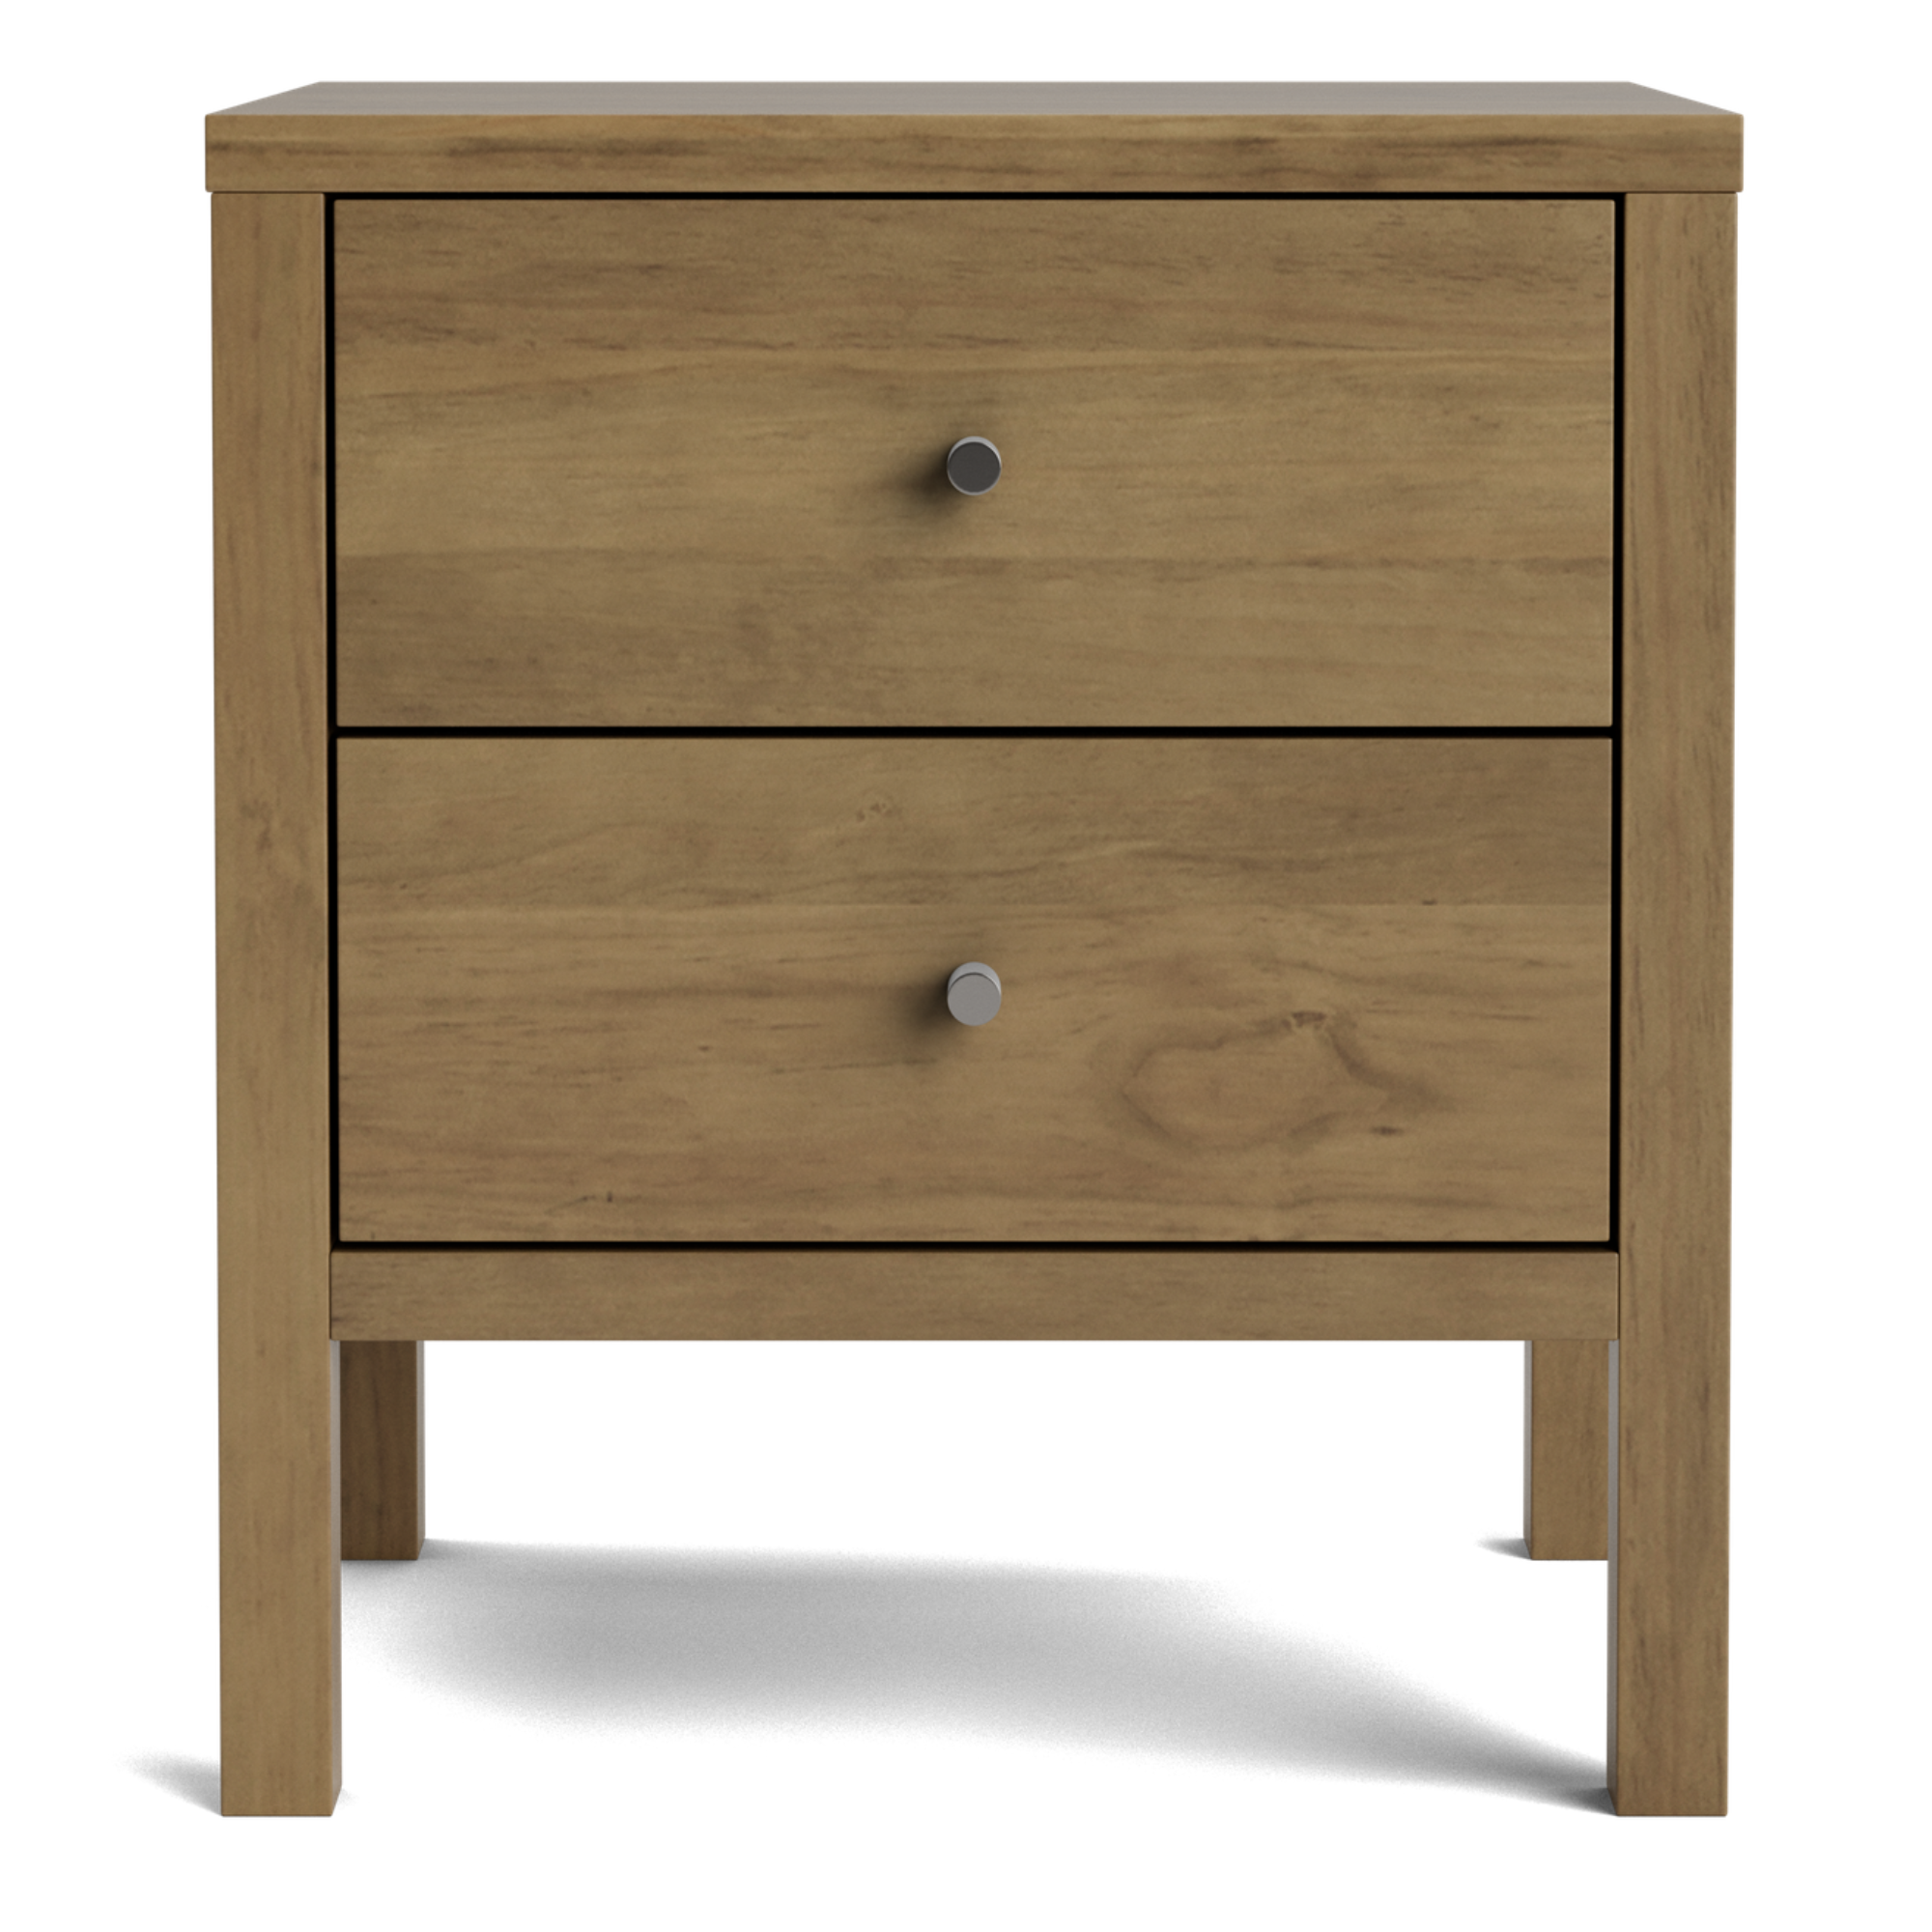 ANDES 2 DRAWER BEDSIDE | NZ PINE OR AMERICAN ASH | NZ MADE